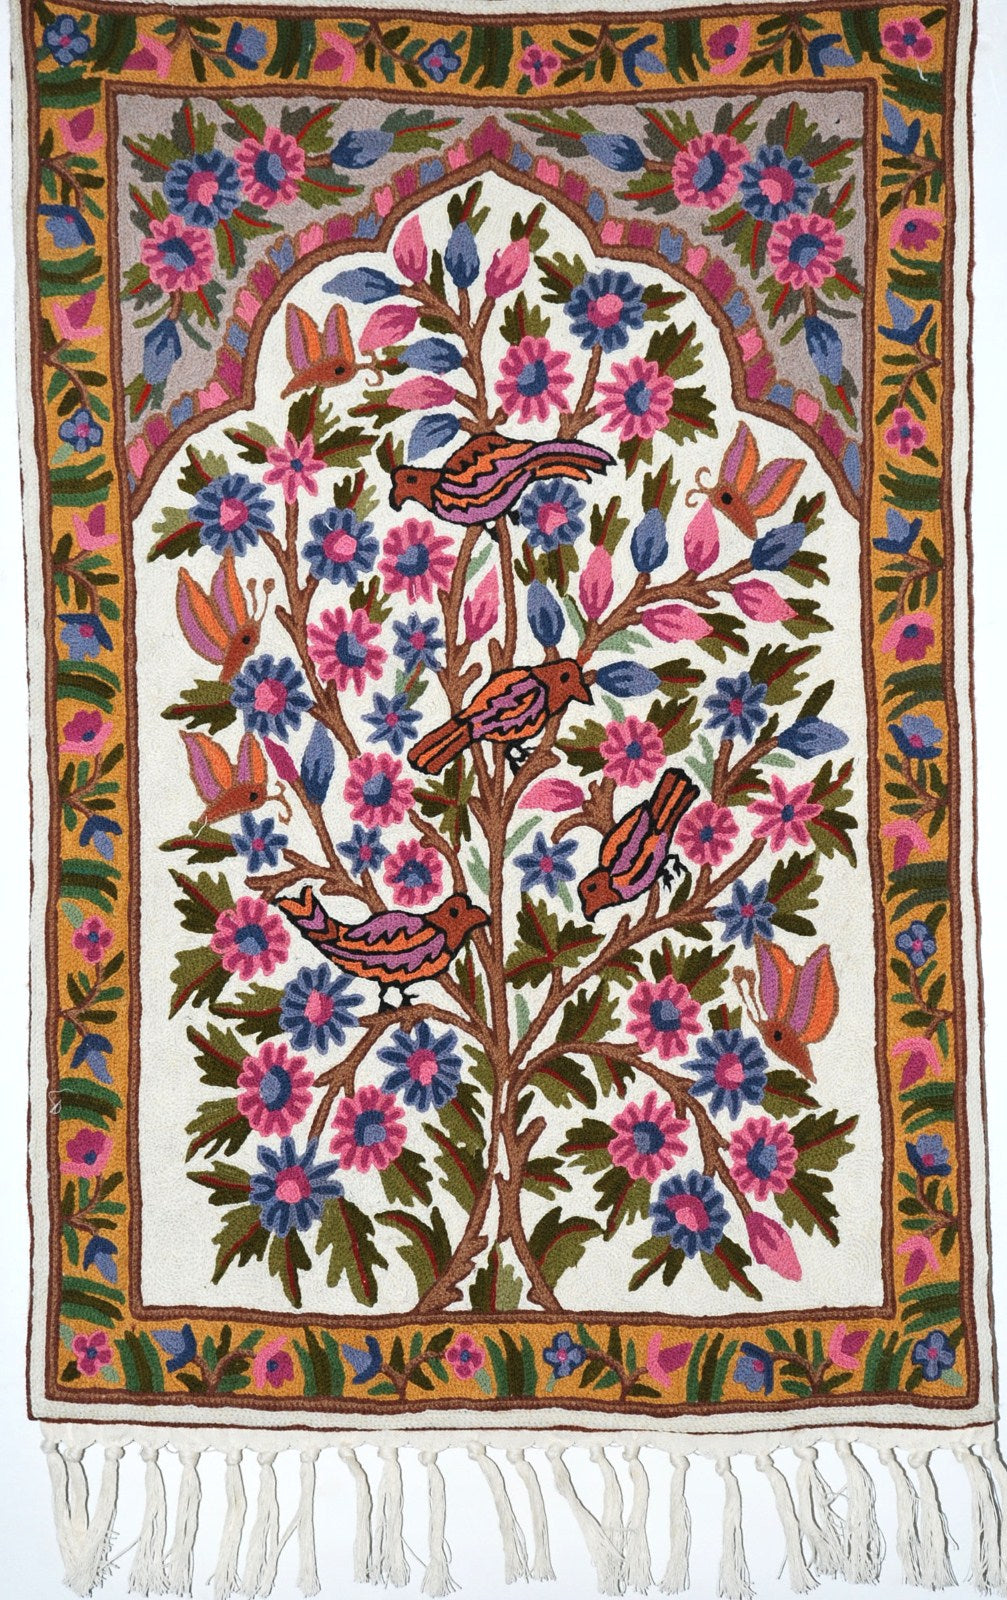 ChainStitch Tapestry Wall Hanging Area Rug "Tree of Life Birds", Multicolor Embroidery 2x3 feet #CWR6114